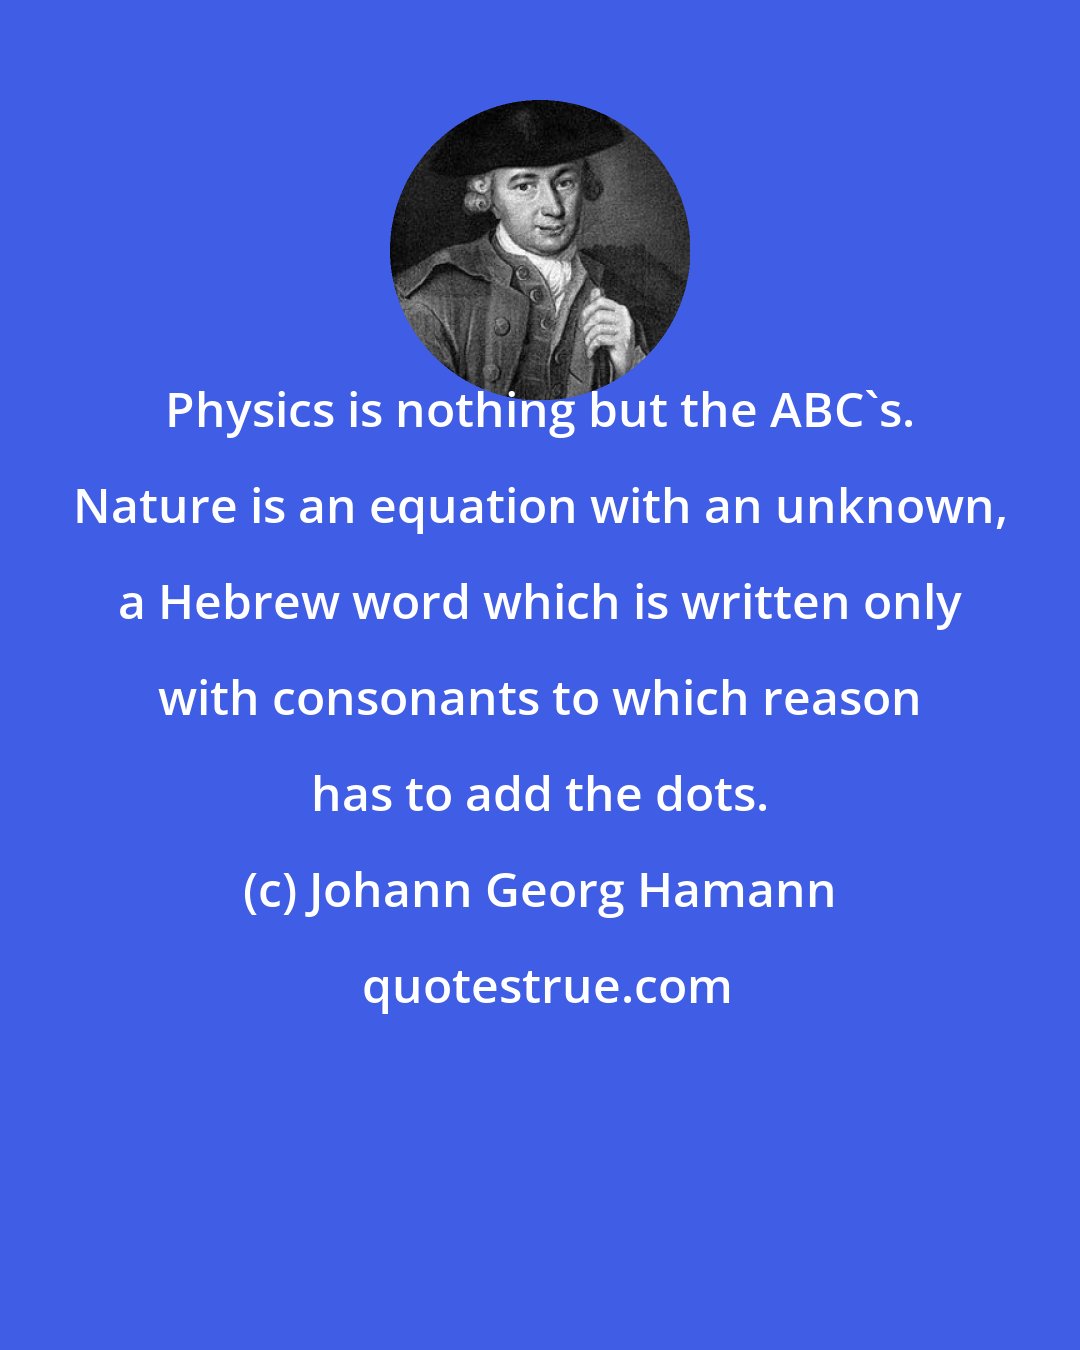 Johann Georg Hamann: Physics is nothing but the ABC's. Nature is an equation with an unknown, a Hebrew word which is written only with consonants to which reason has to add the dots.